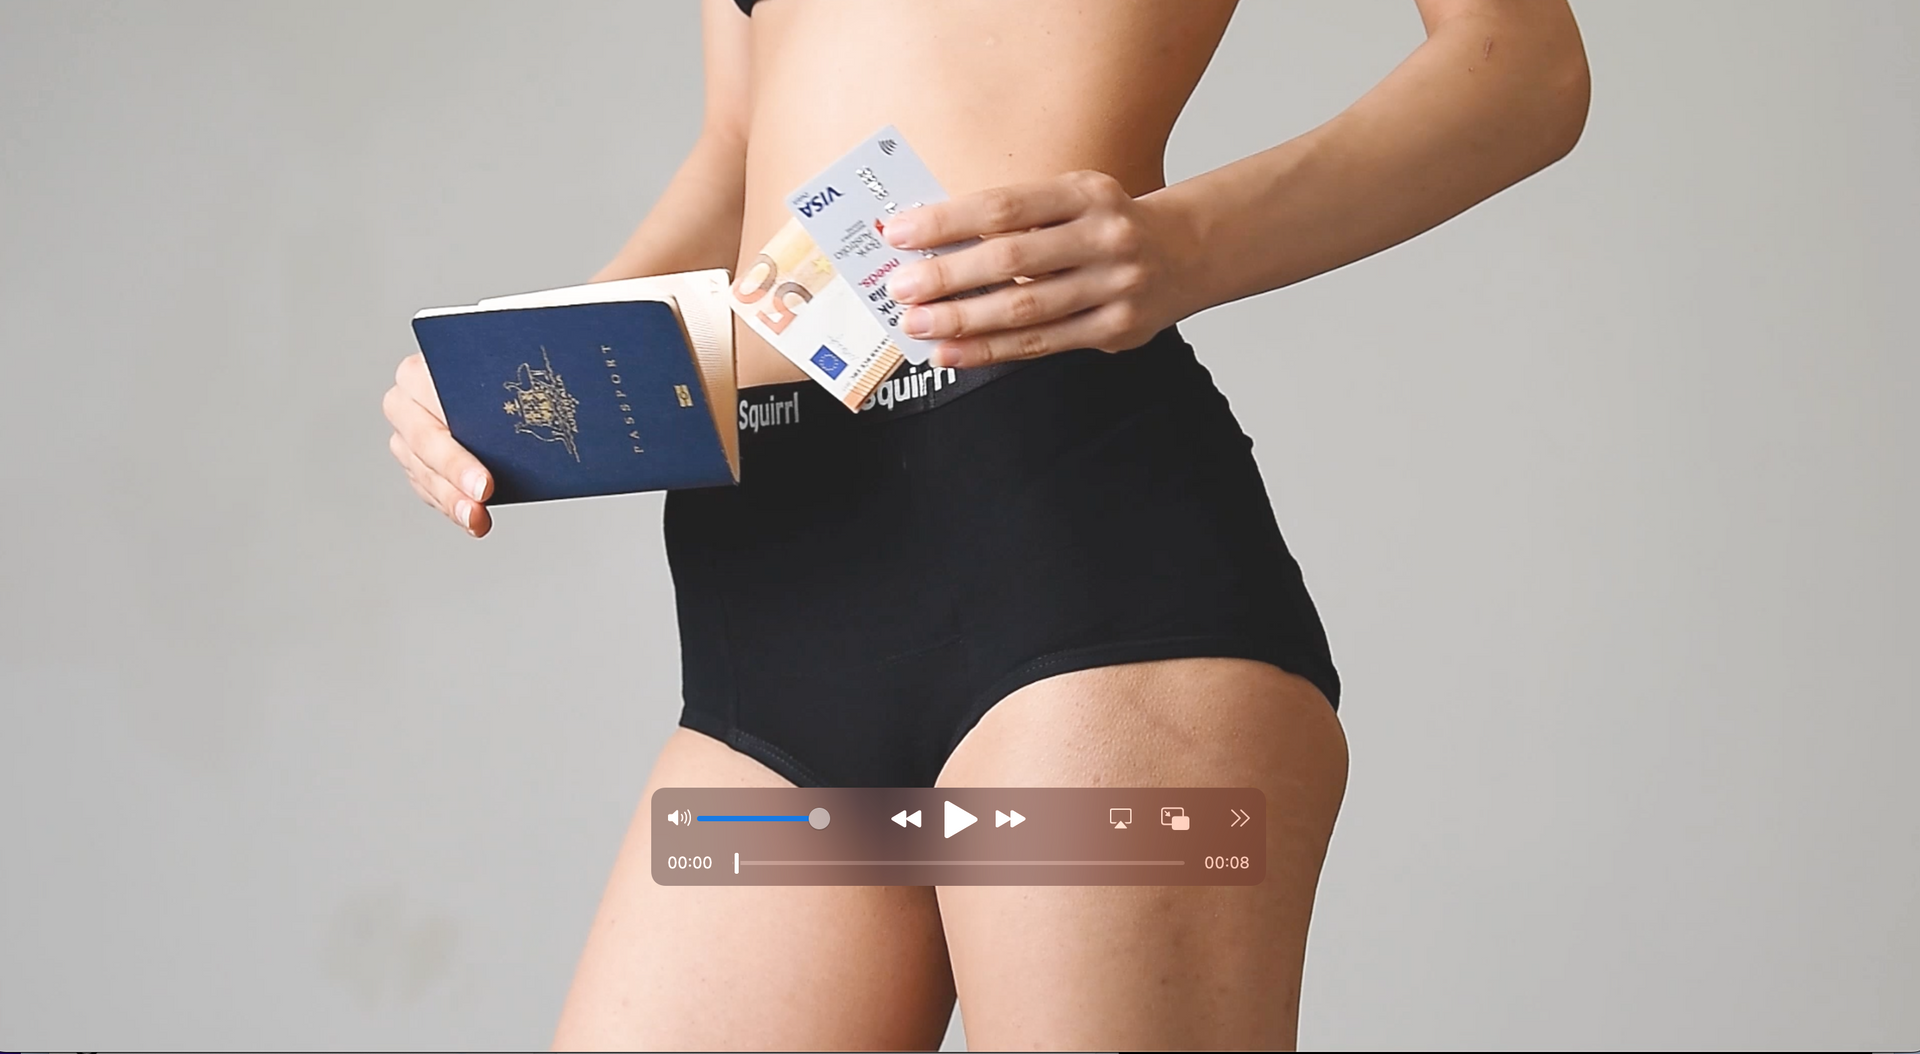 Load video: Packing Squirrl pickpocket proof travel underwear for women